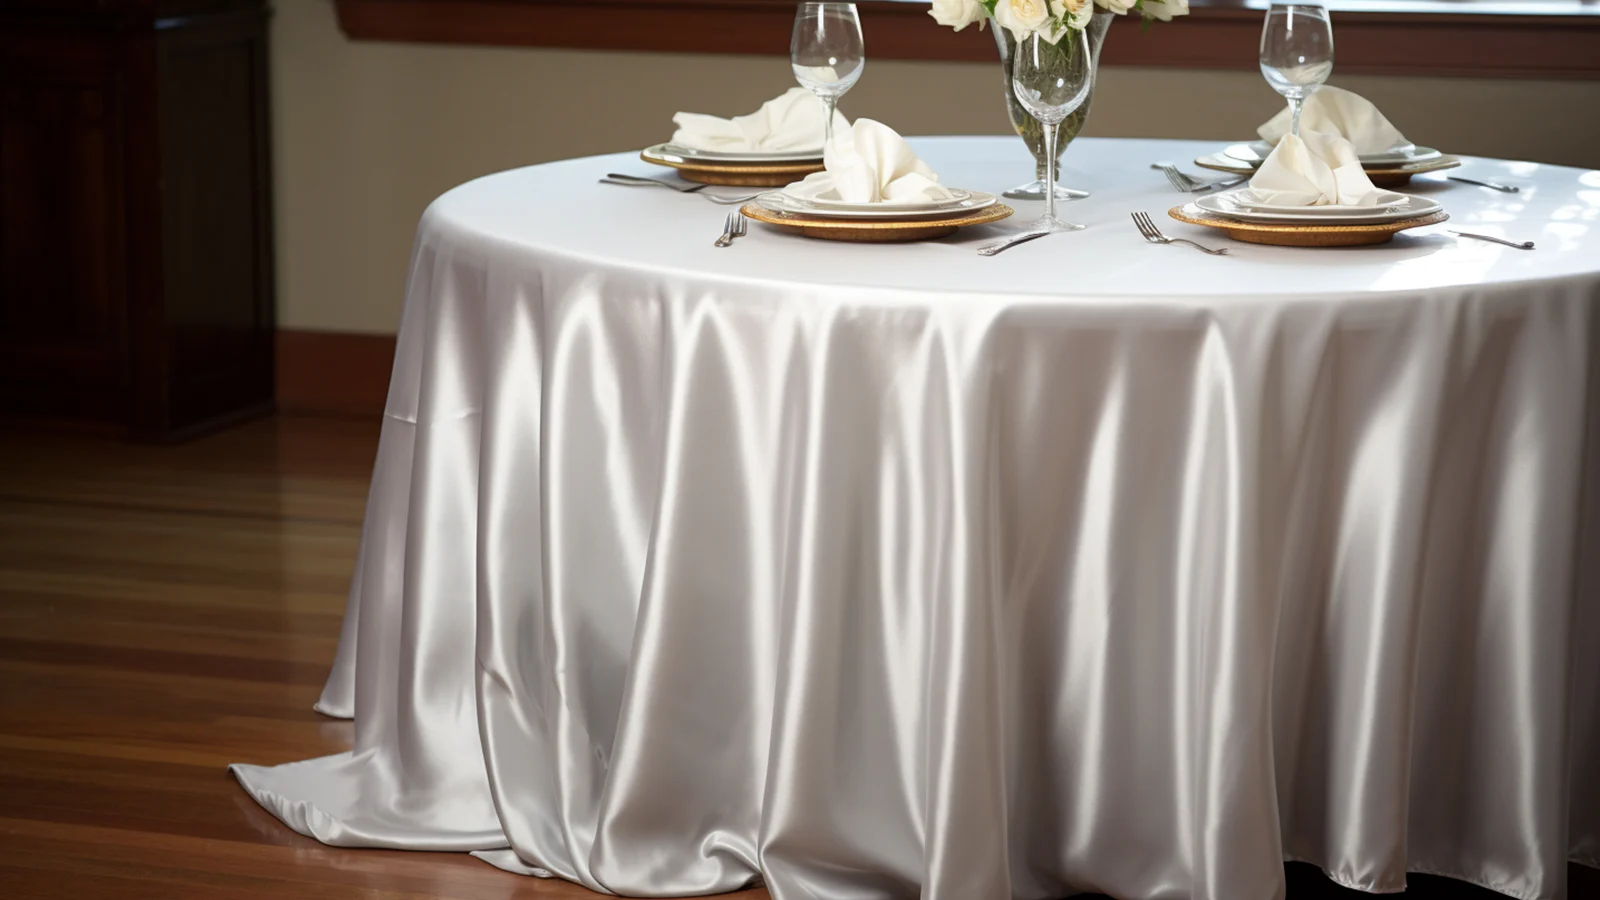 A round table with a silver Satin tablecloth.